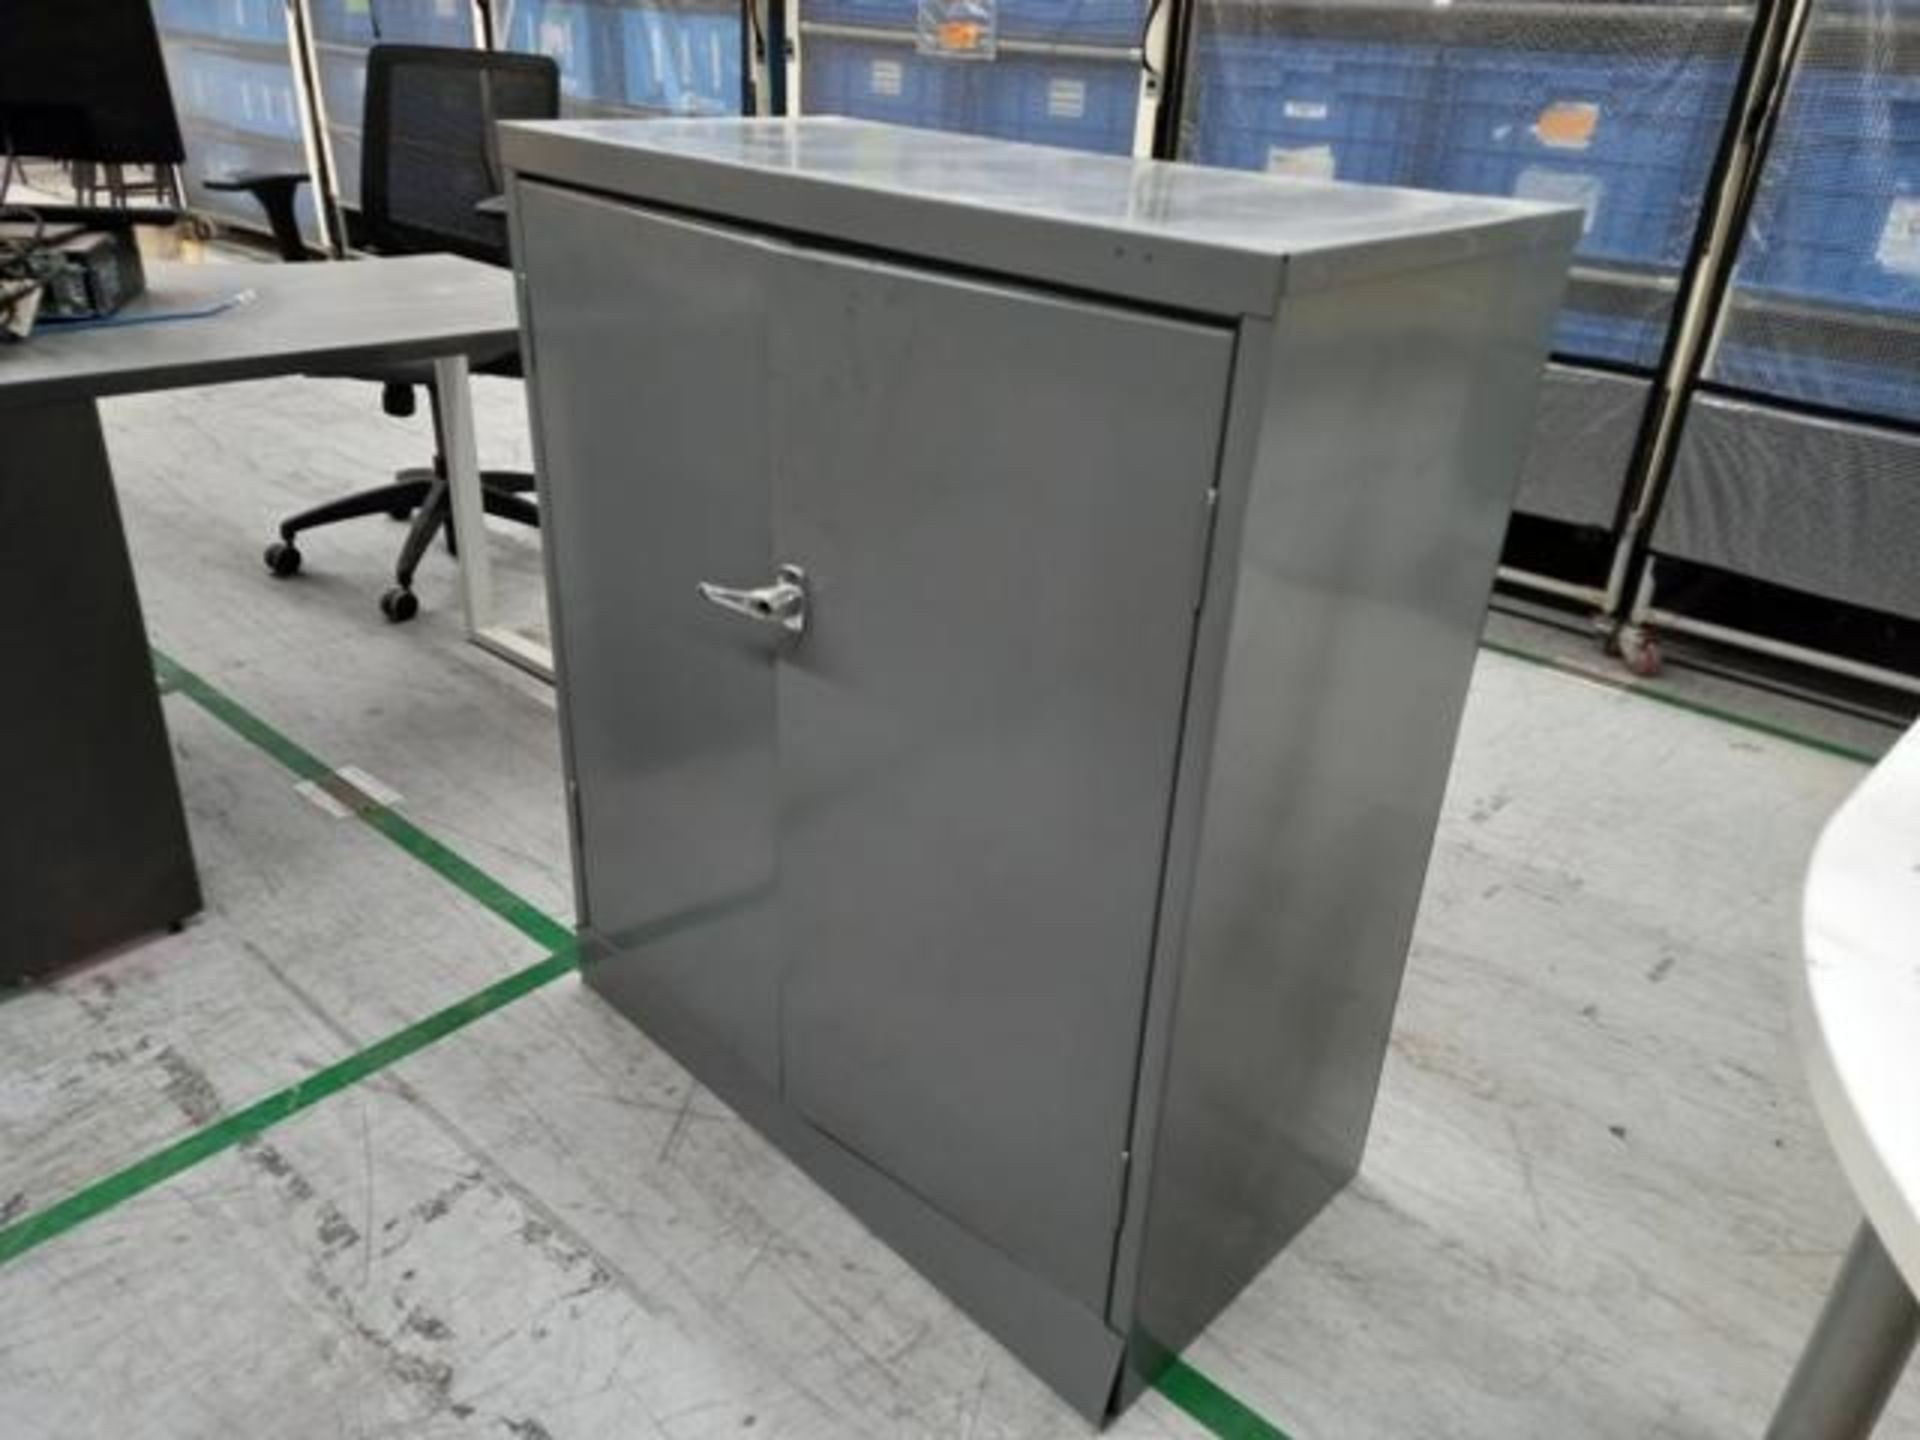 LOT: (66) Of Furniture and Computing Equipment Consisting of: Computers, Printers, Desks, Chairs, Dr - Image 7 of 38